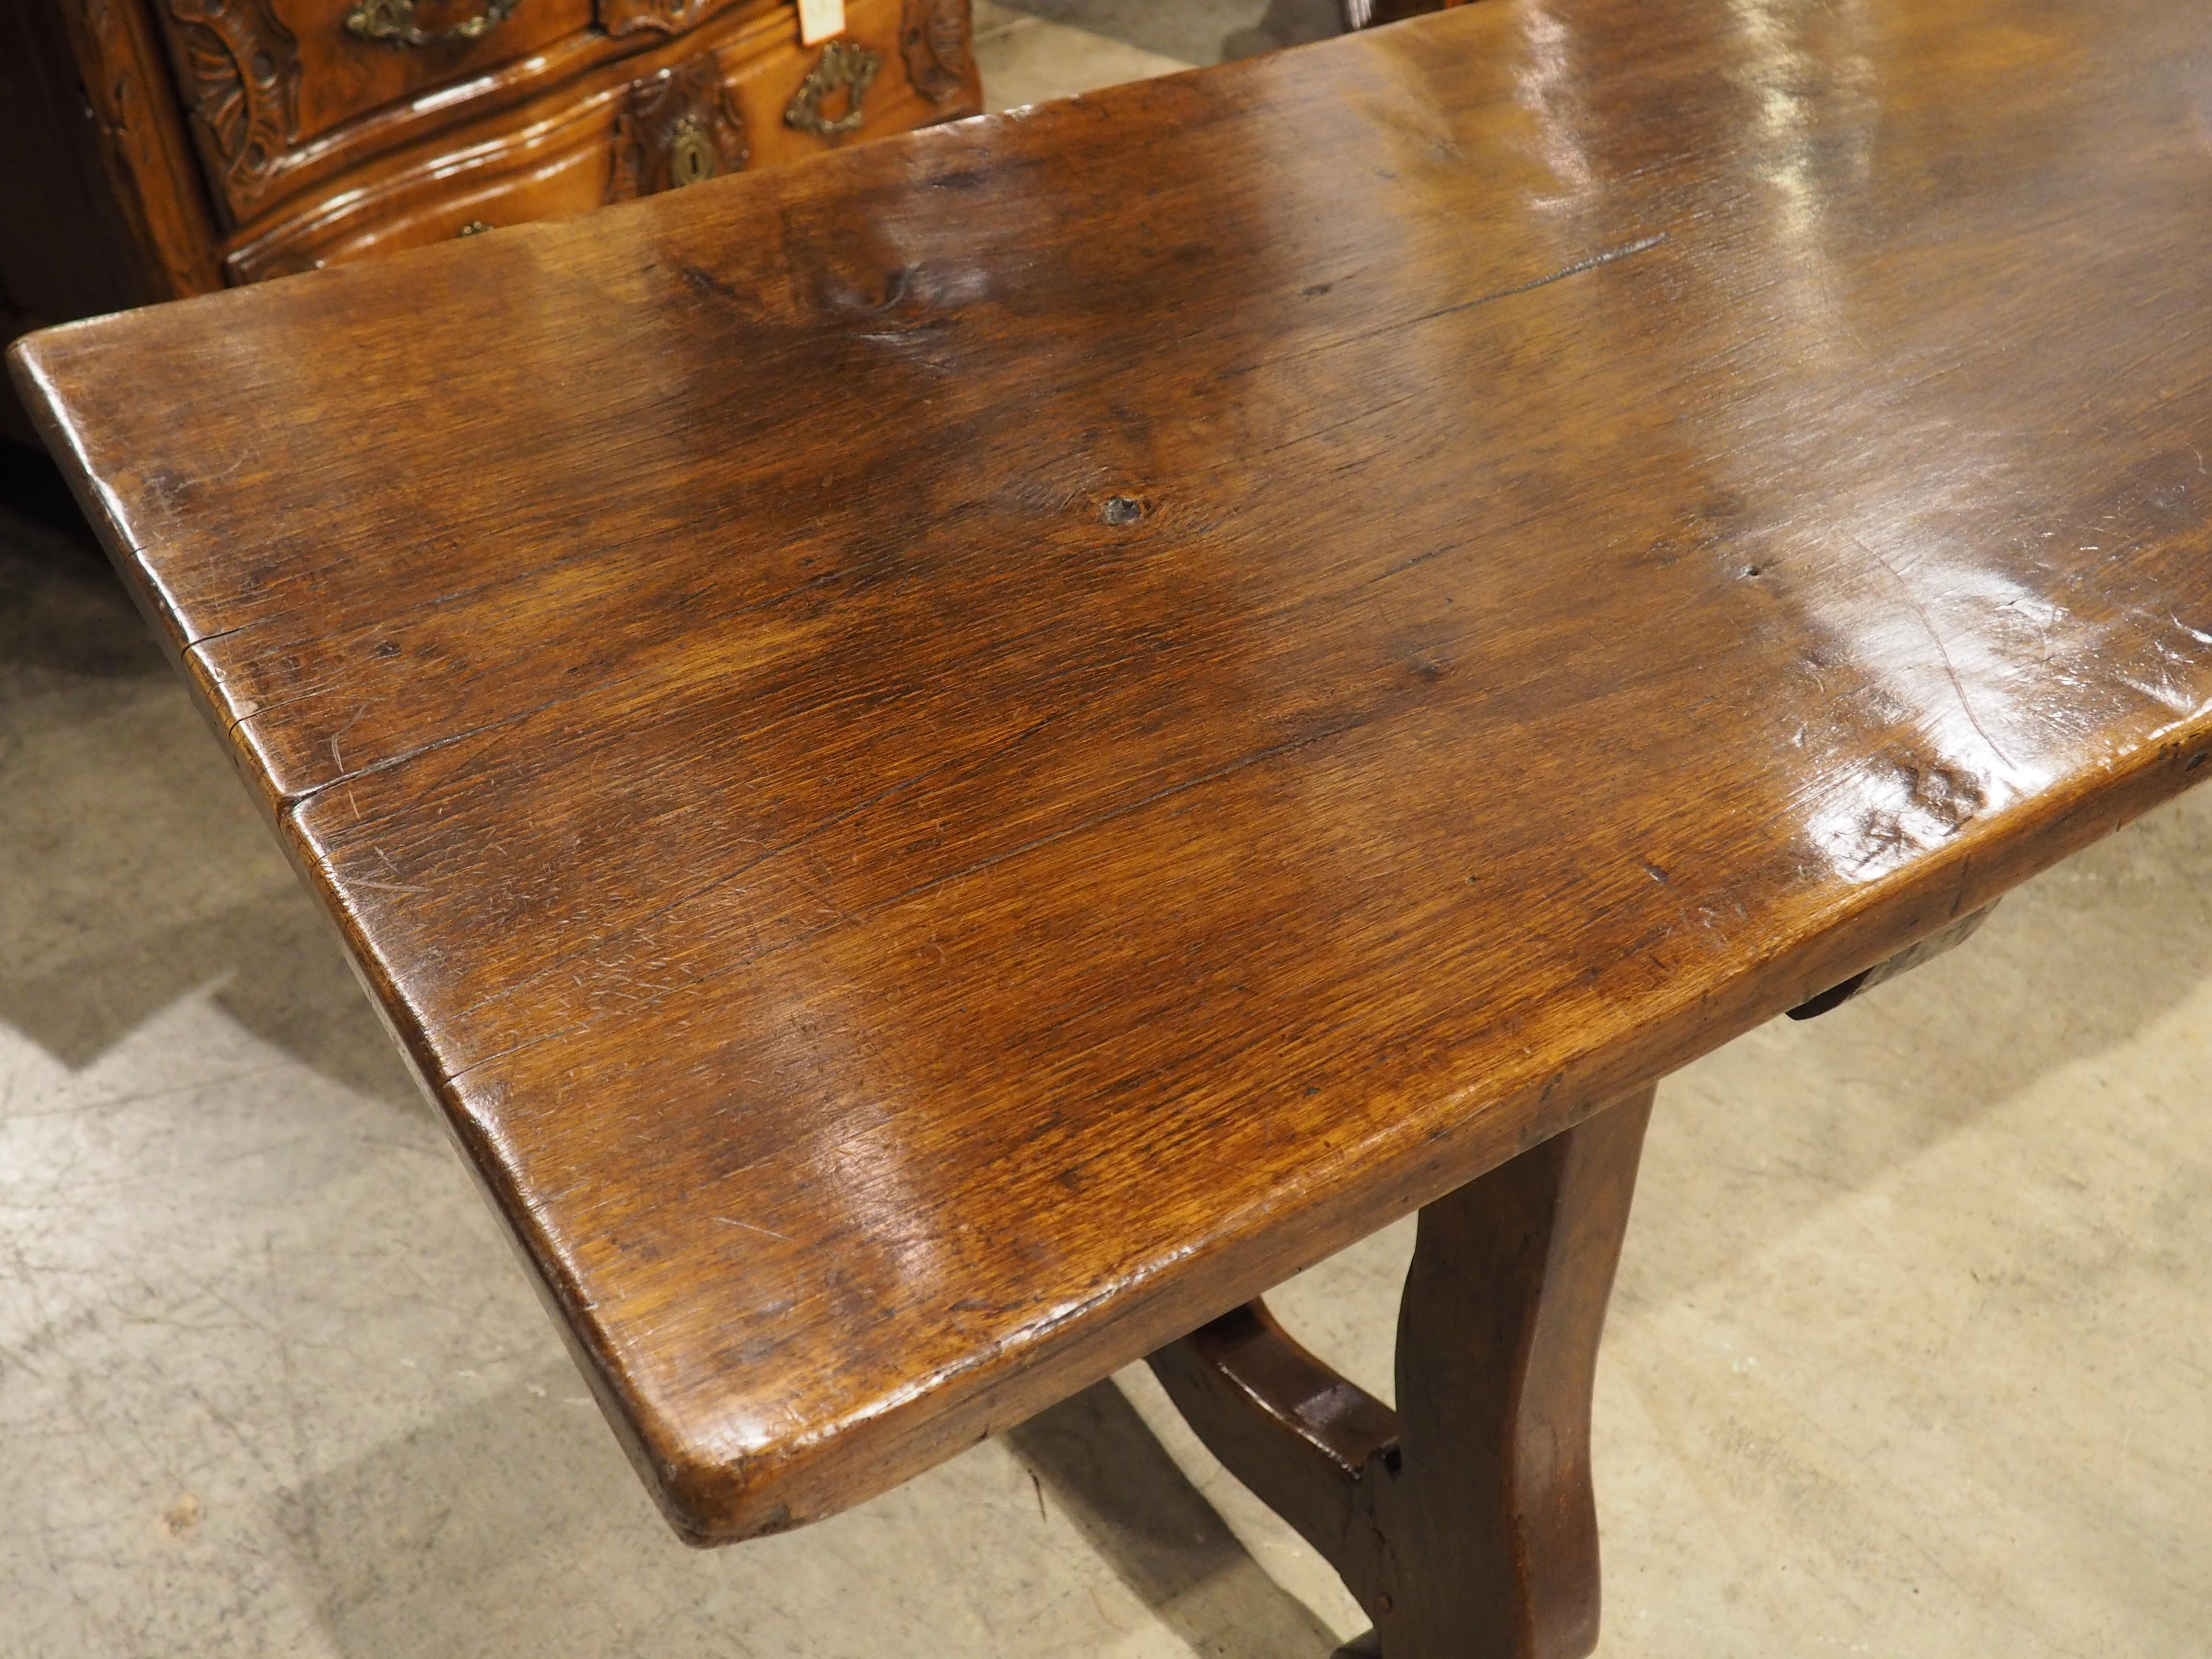 A beautiful example of a single plank table from Spain, this elegant walnut and oak dining table measures over nine feet long. Hand-carved in the 1700s, the table has been assembled true to the Spanish style: with a collapsible iron stretcher.